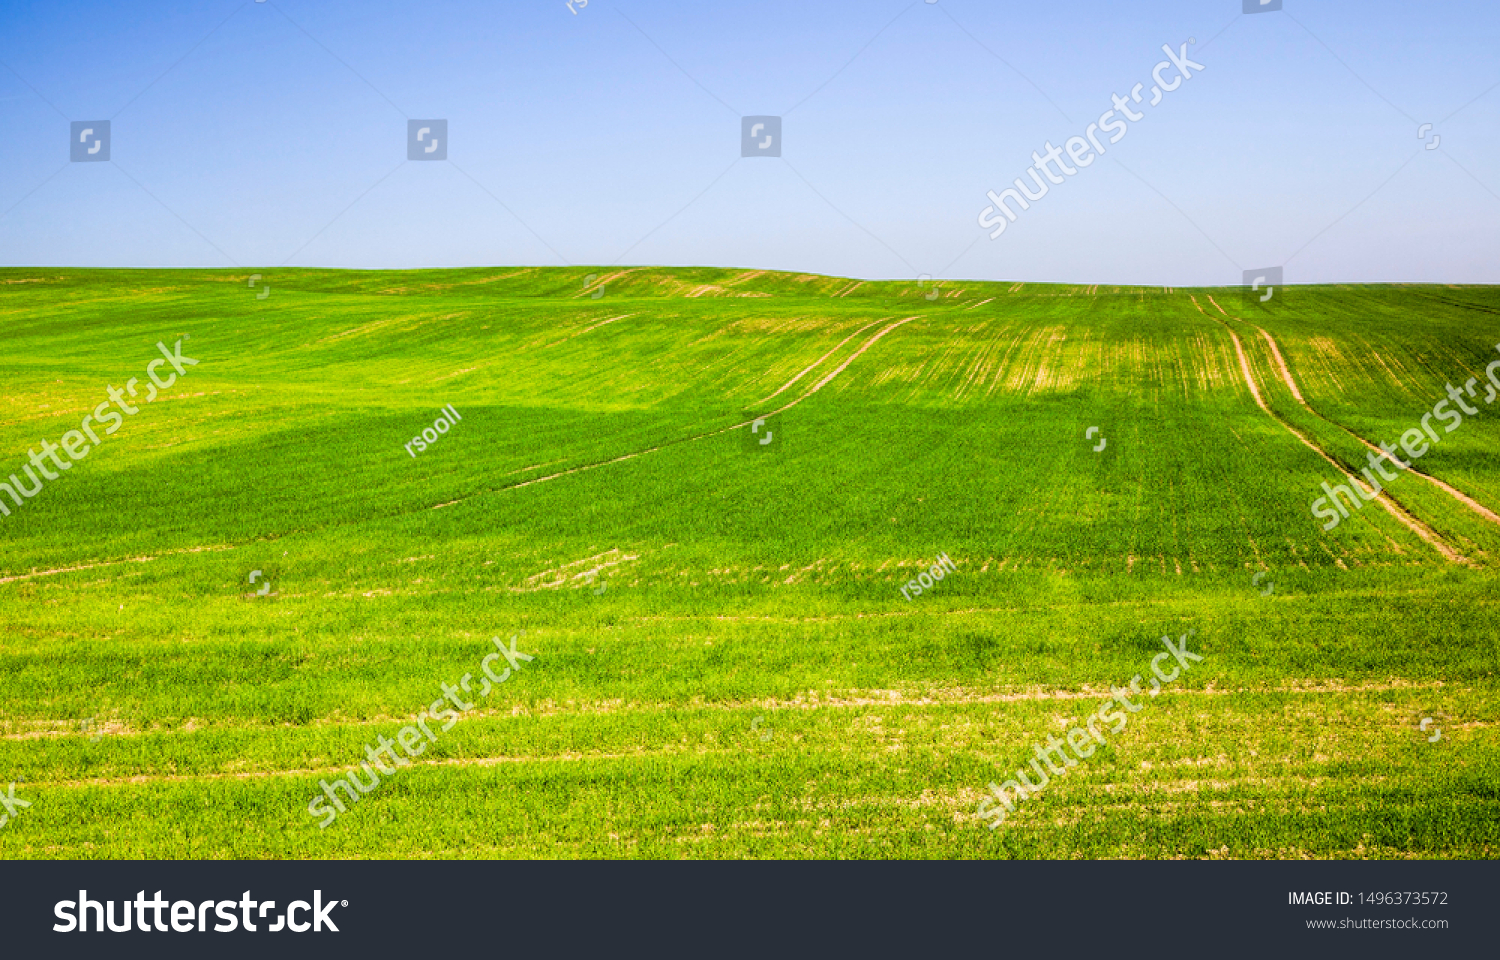 sprouted green young grass in summer or spring, Sunny bright weather #1496373572